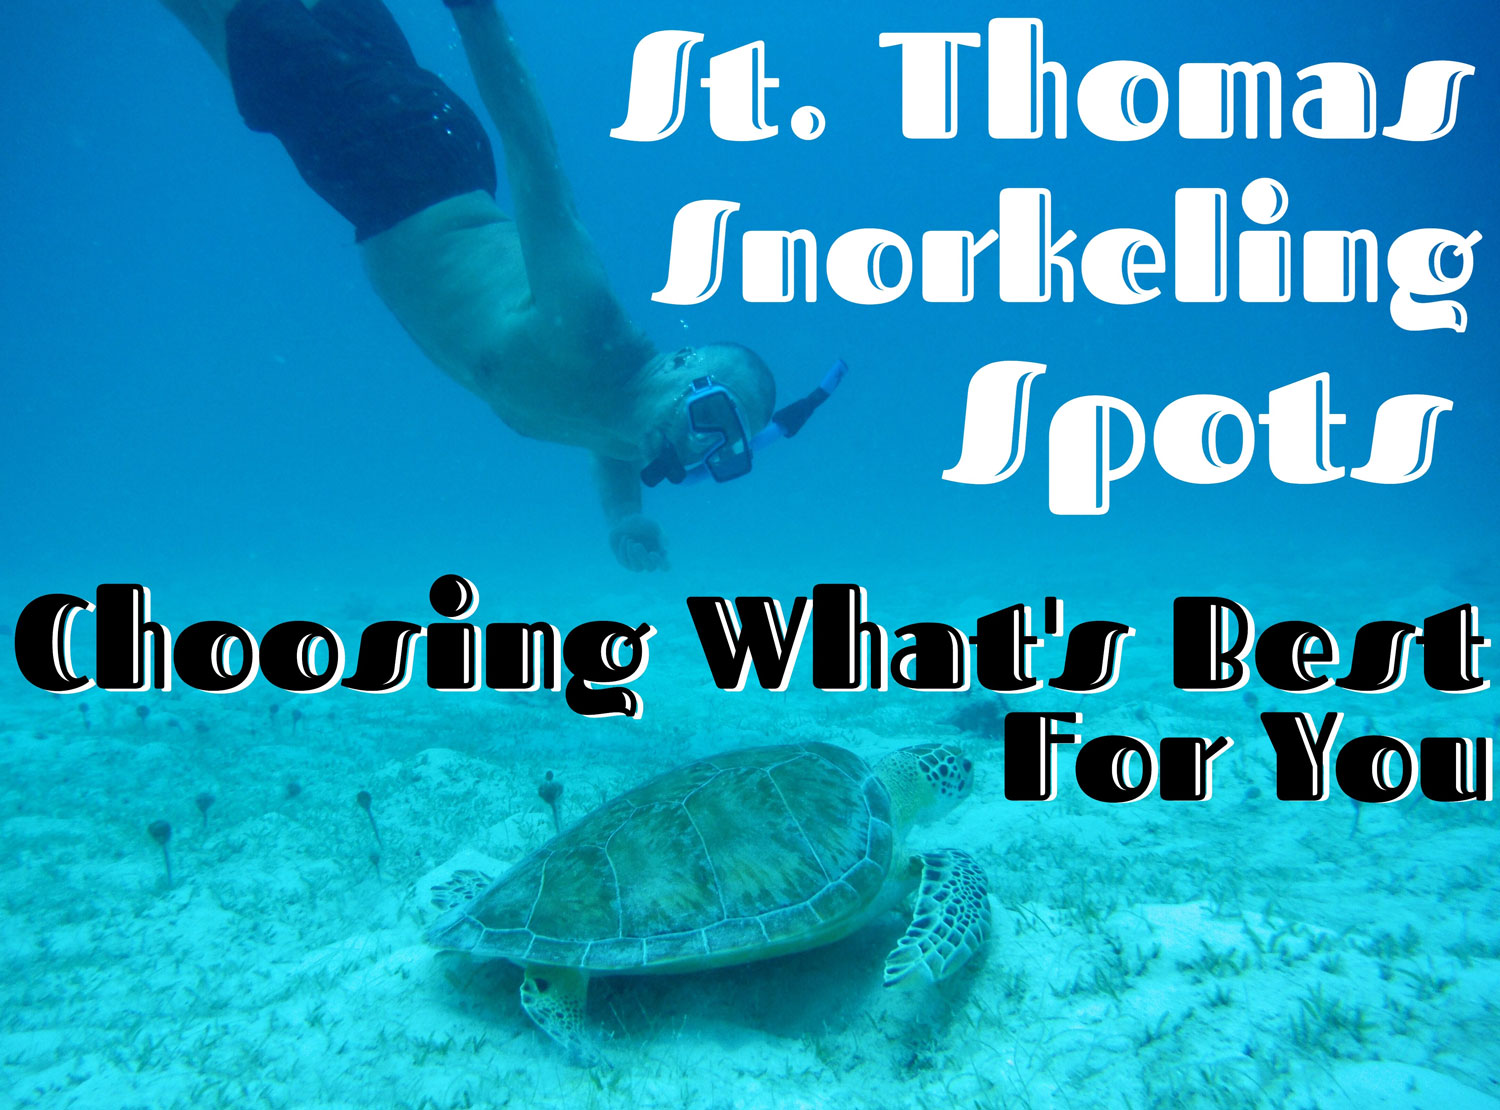 AD DEMO: St. Thomas Snorkeling Spots: Choosing What's Best For You